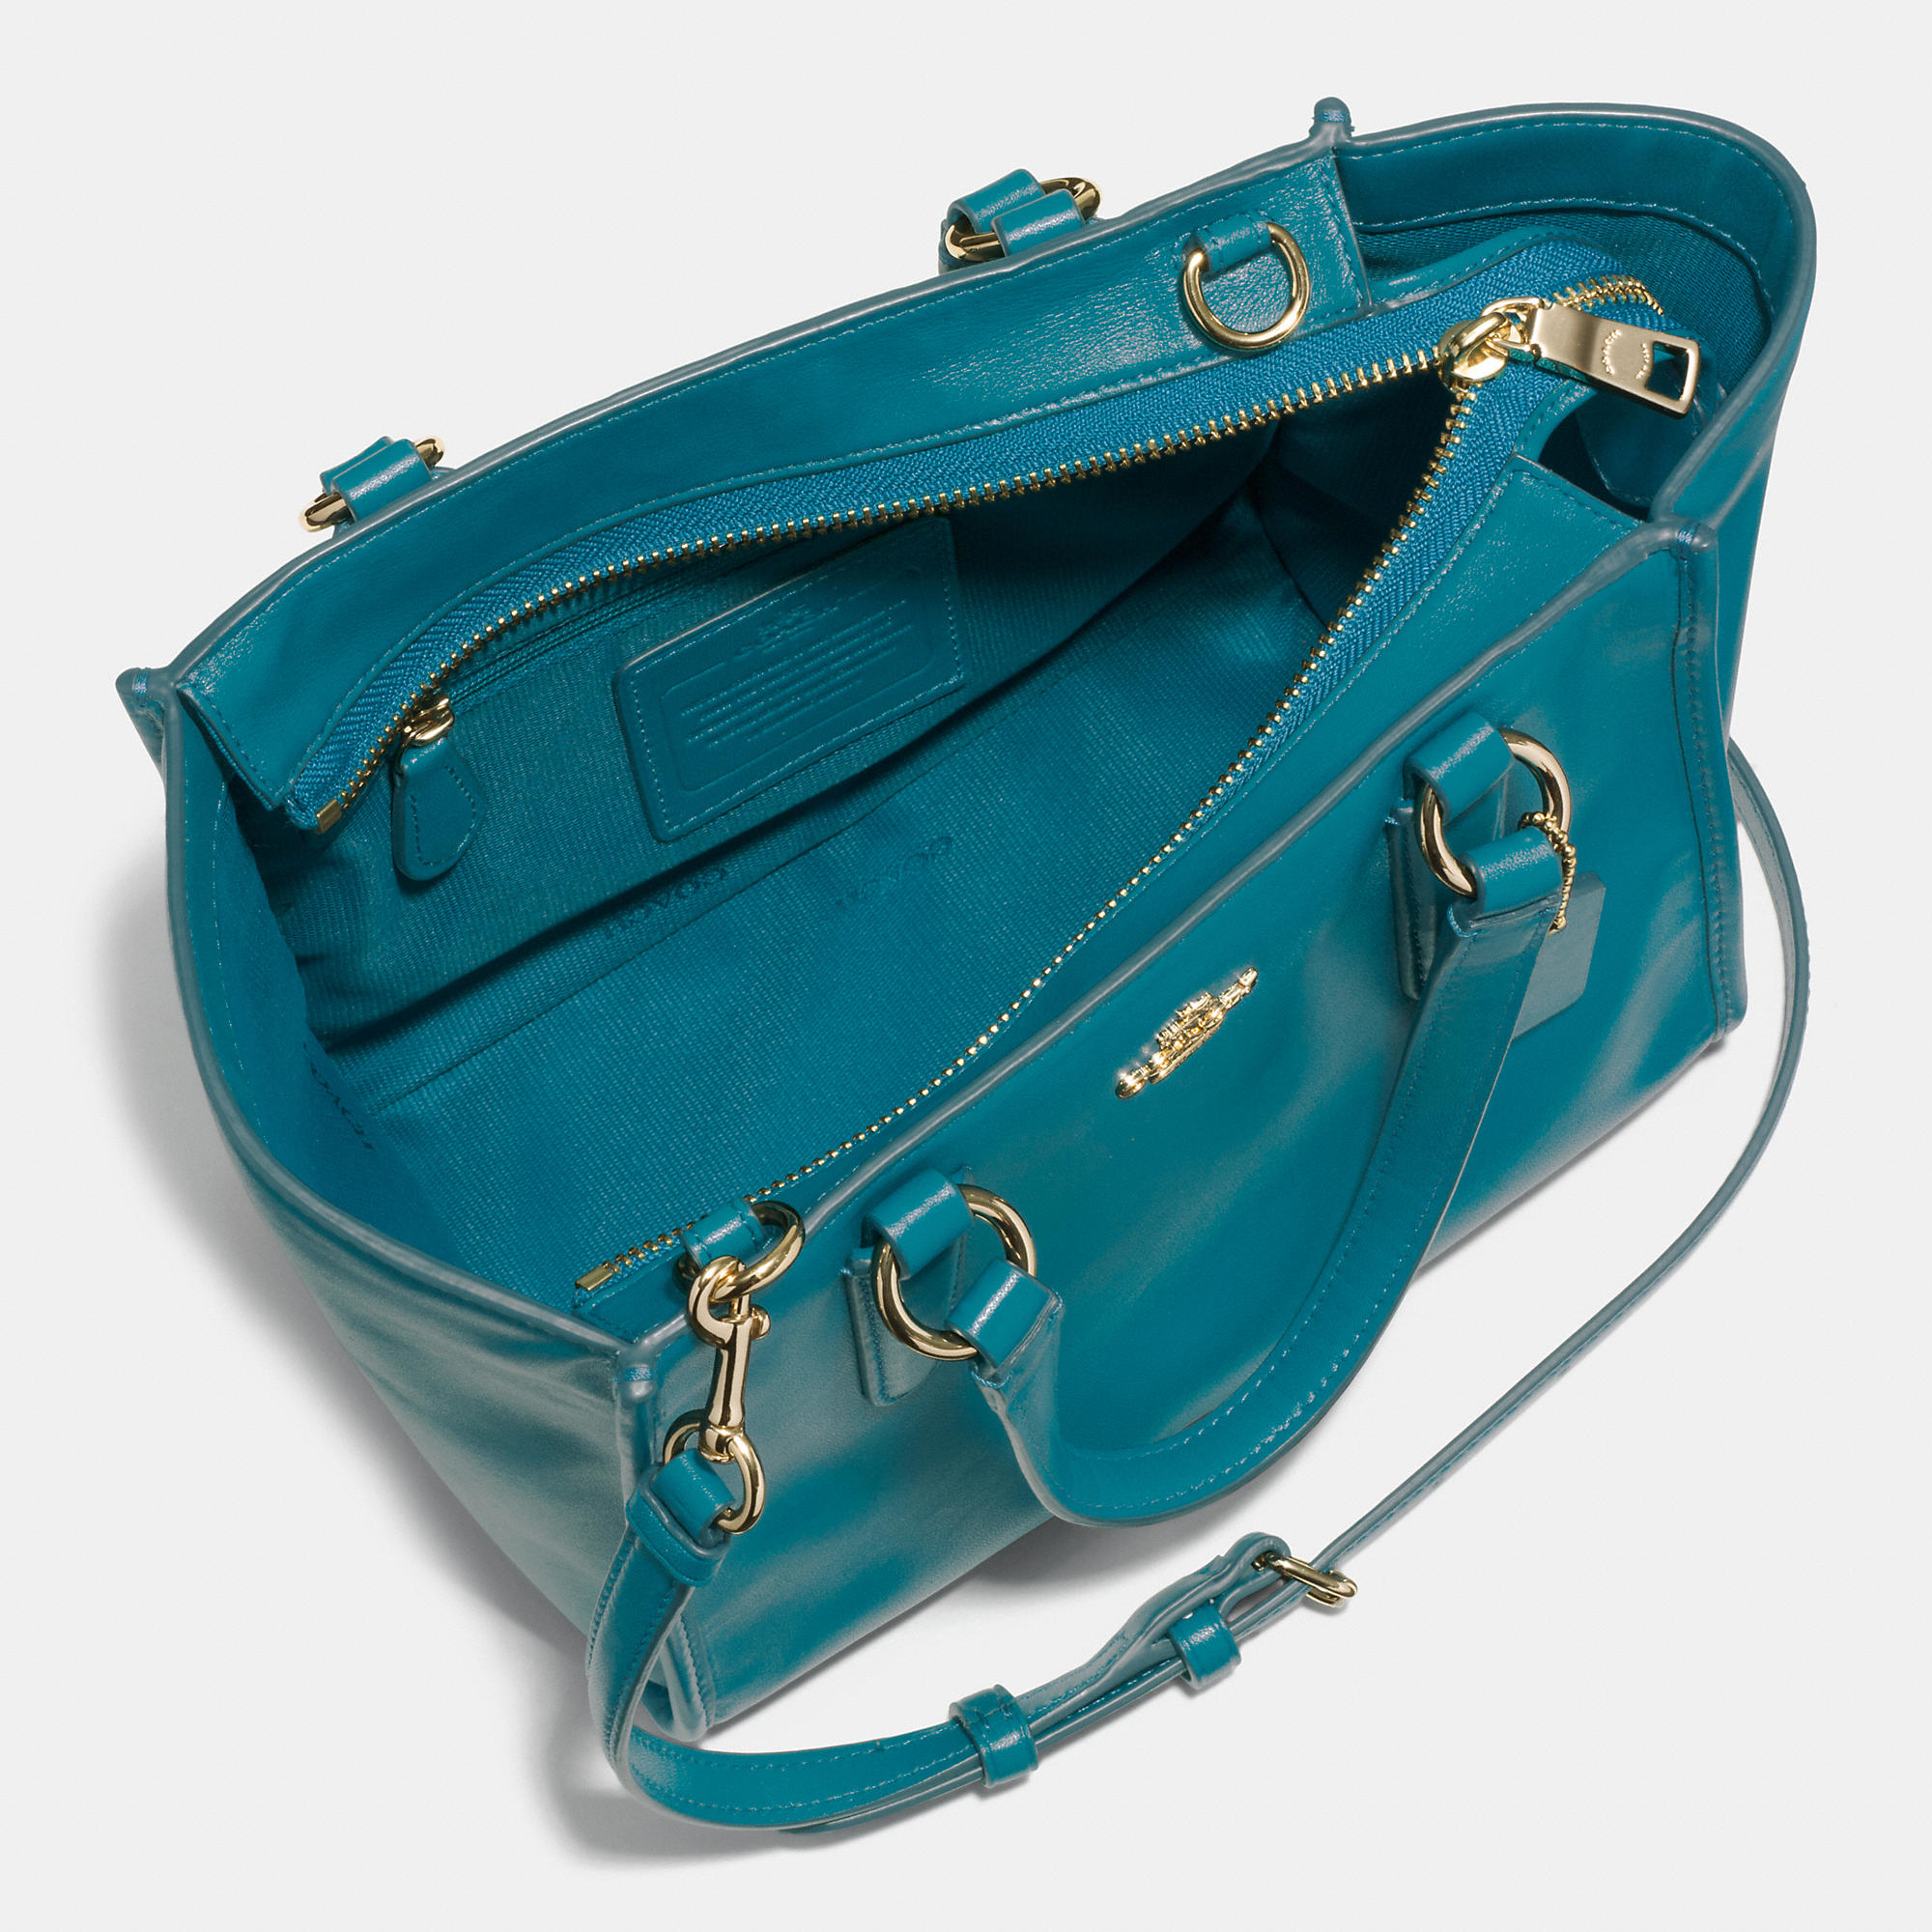 COACH Crosby Mini Carryall In Smooth Leather in Blue - Lyst